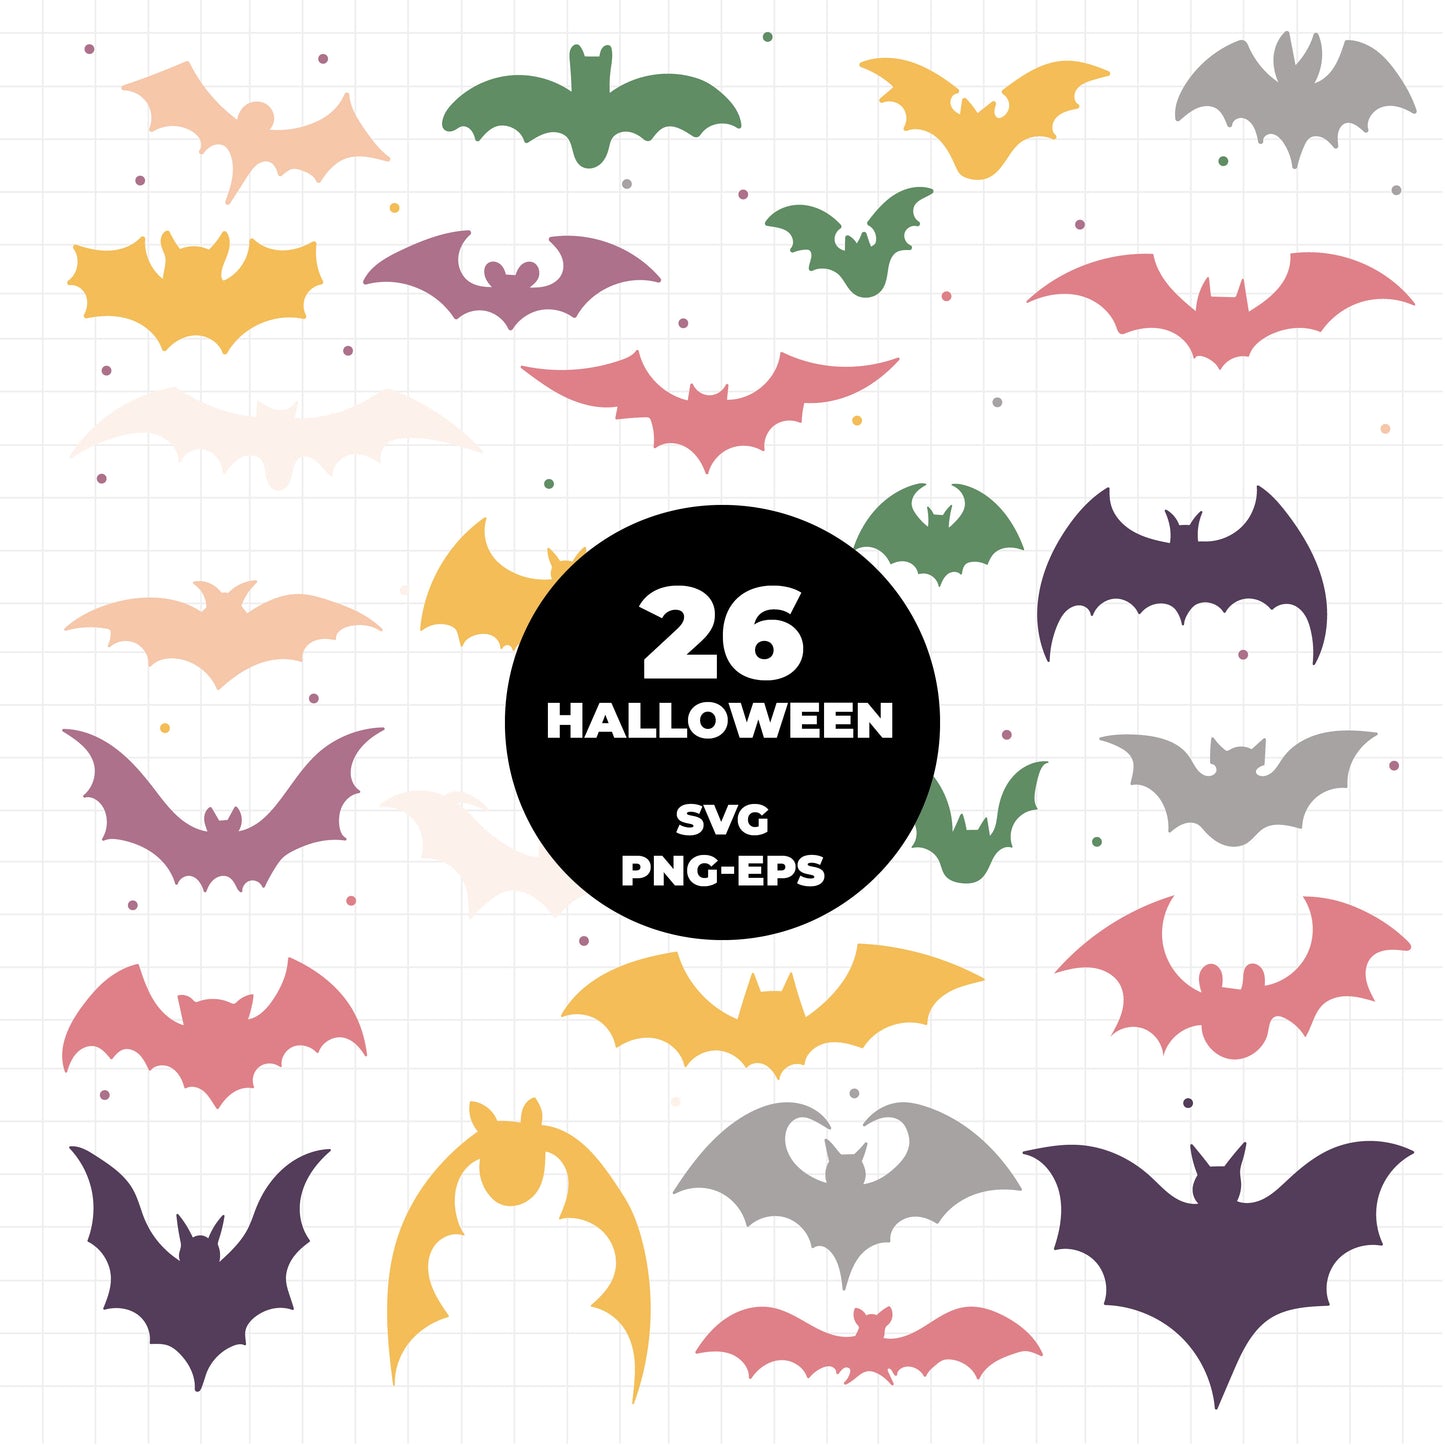 COD1425 -Bats Set for printing and cutting projects/EPS /Halloween Doodles clipart/scrapbook cliparts